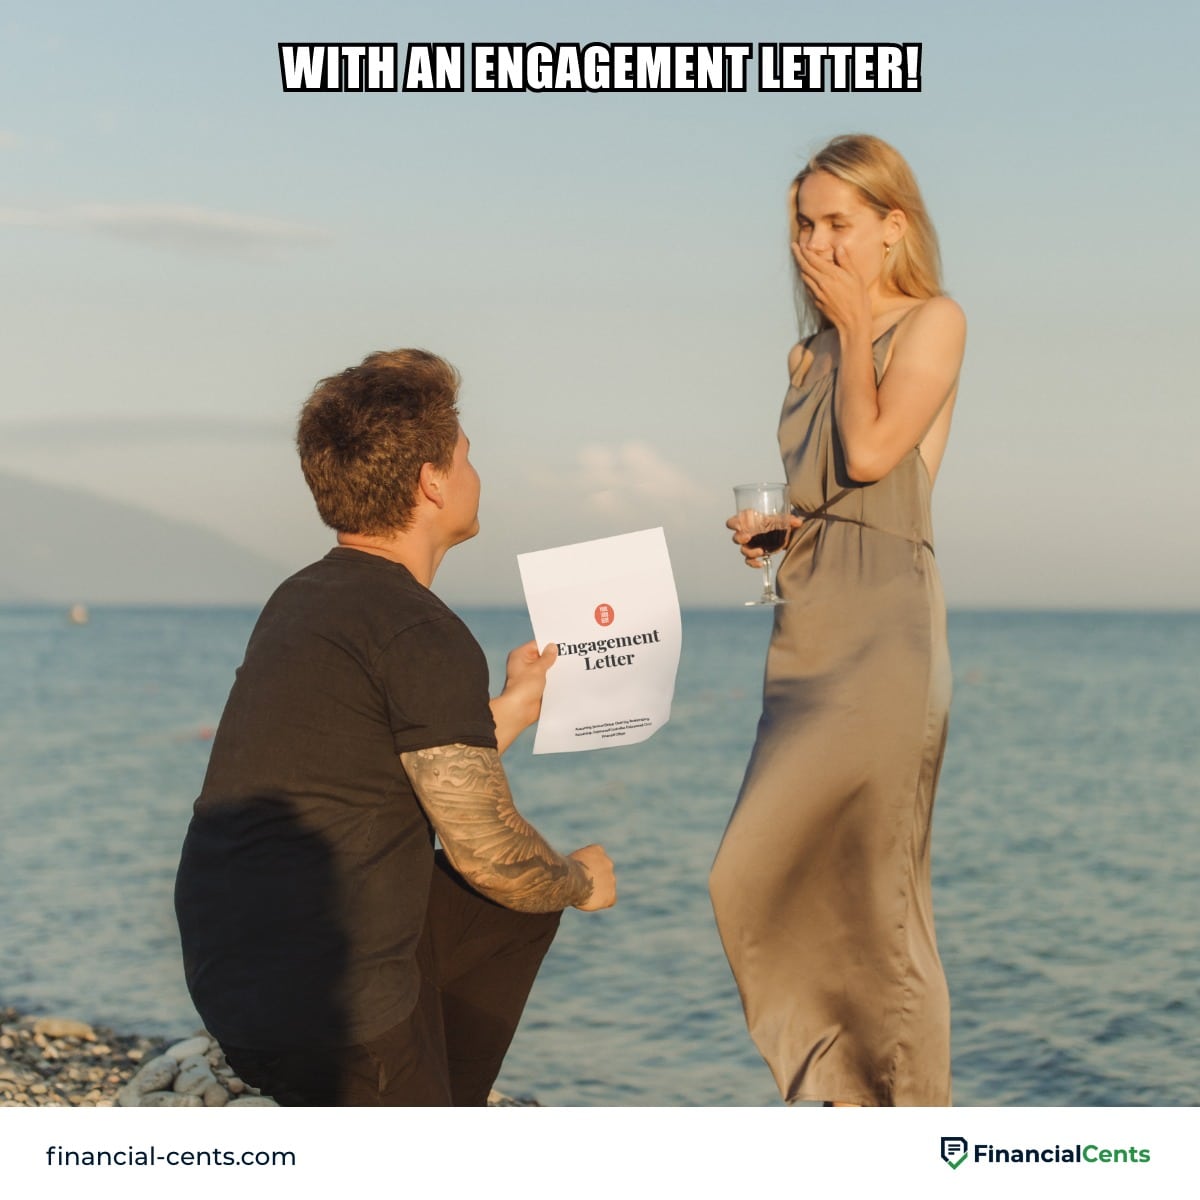 accounting jokes: how did the accountant propose to his girlfriend?